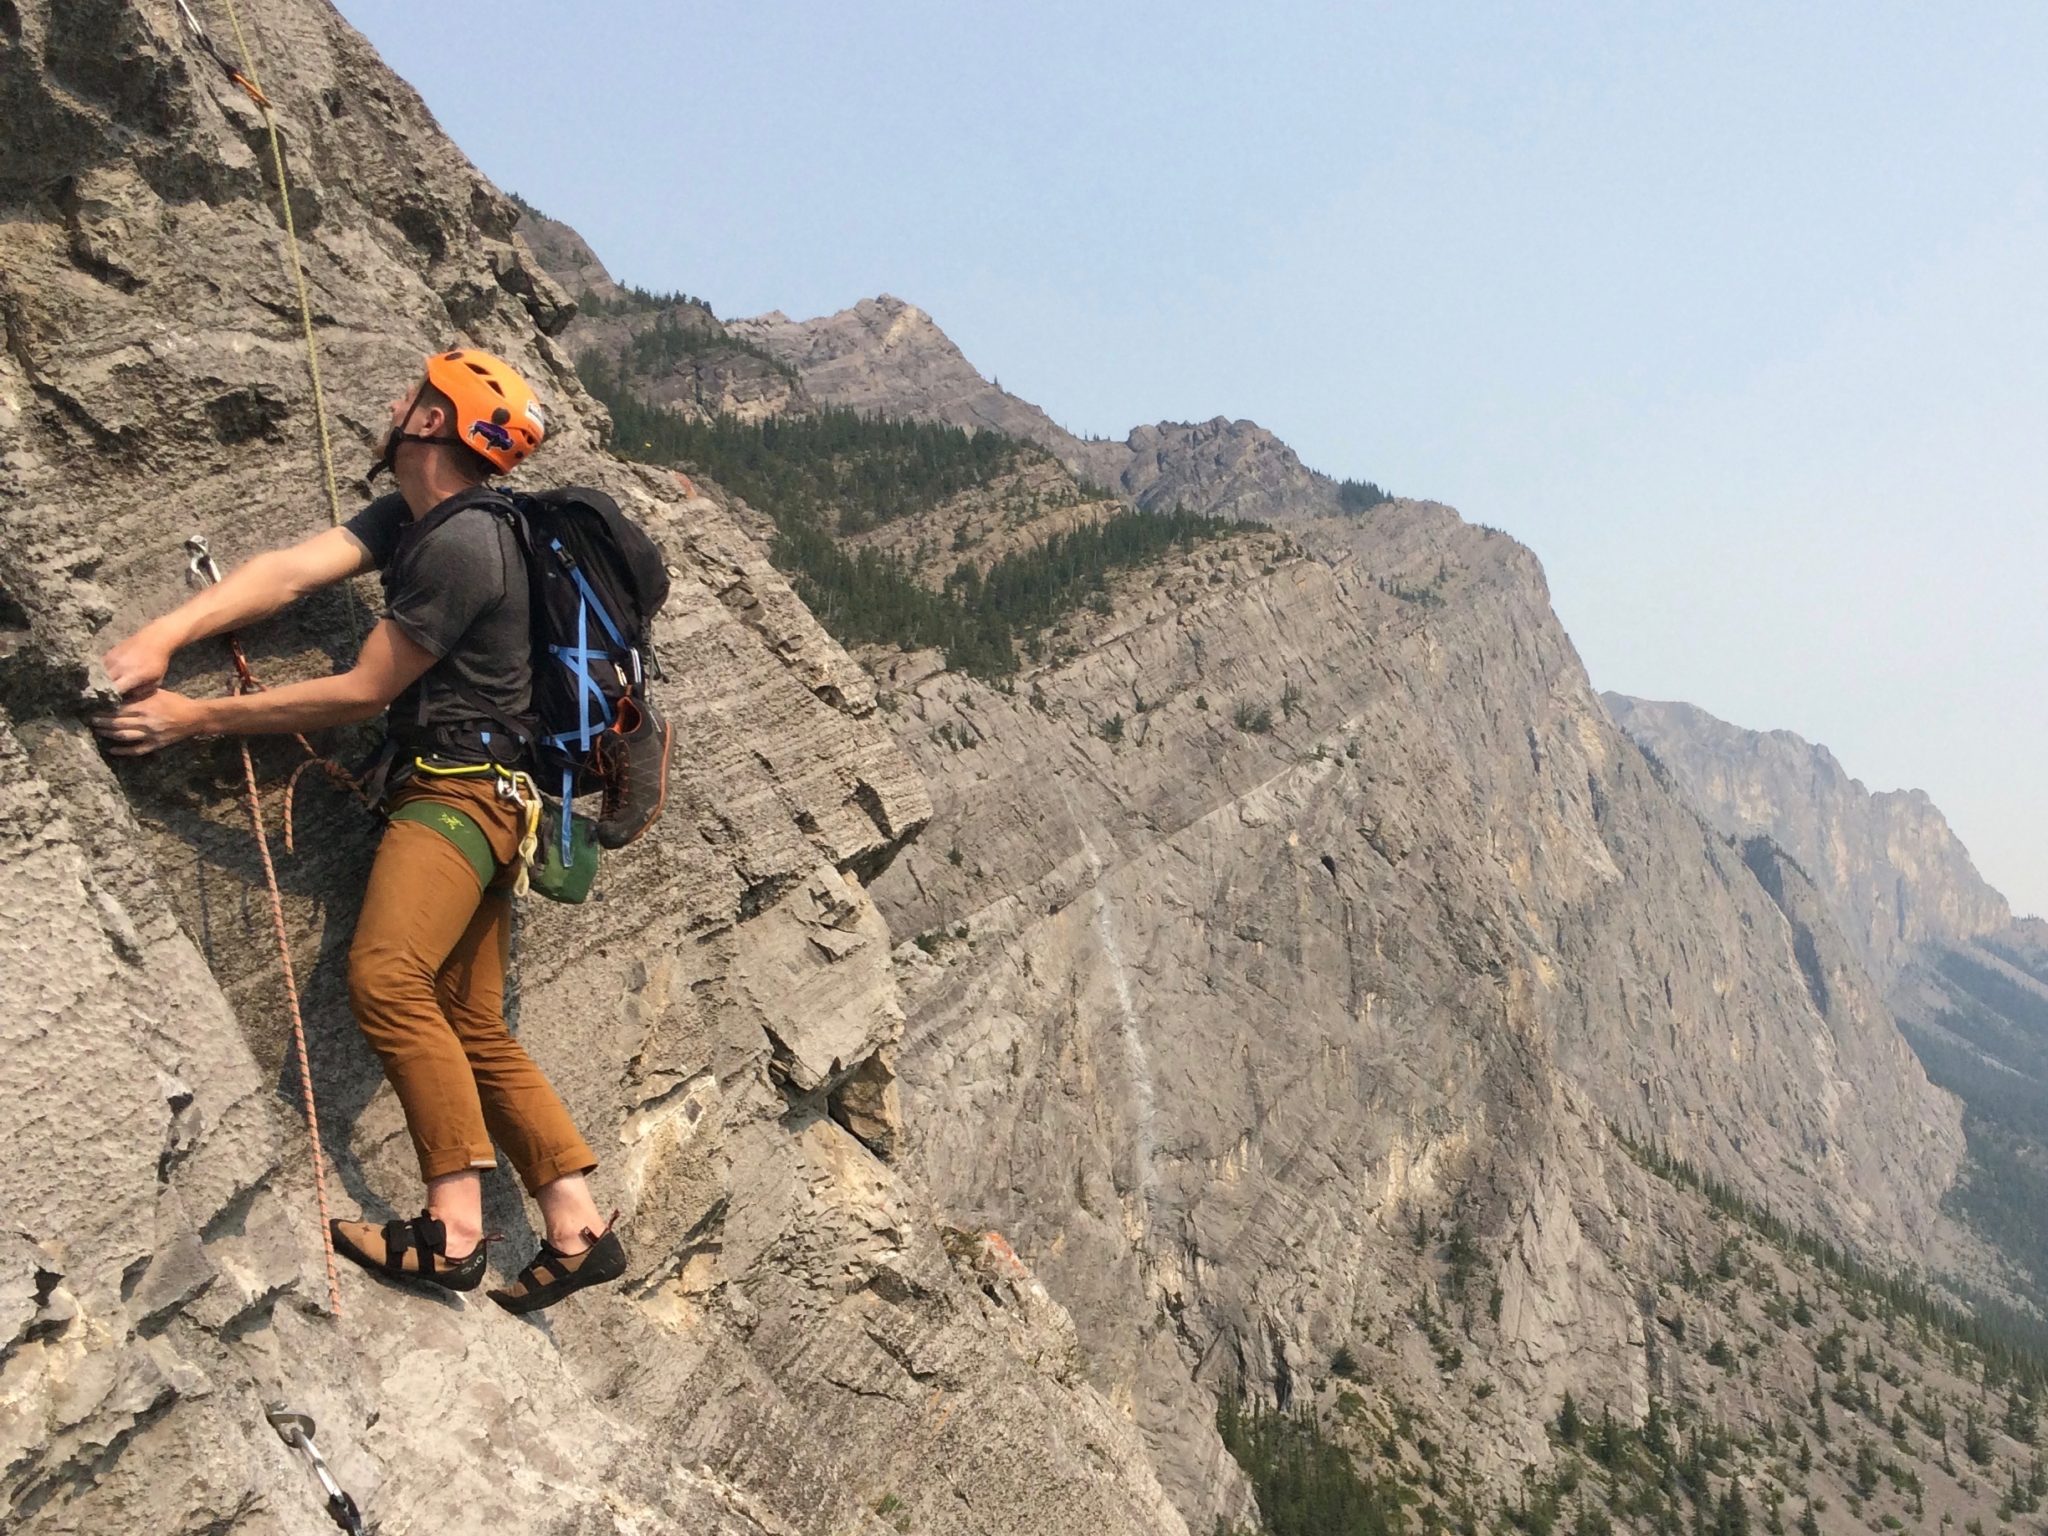 Rock Climbing – Courses and Guiding - Canadian Rockies Alpine Guides